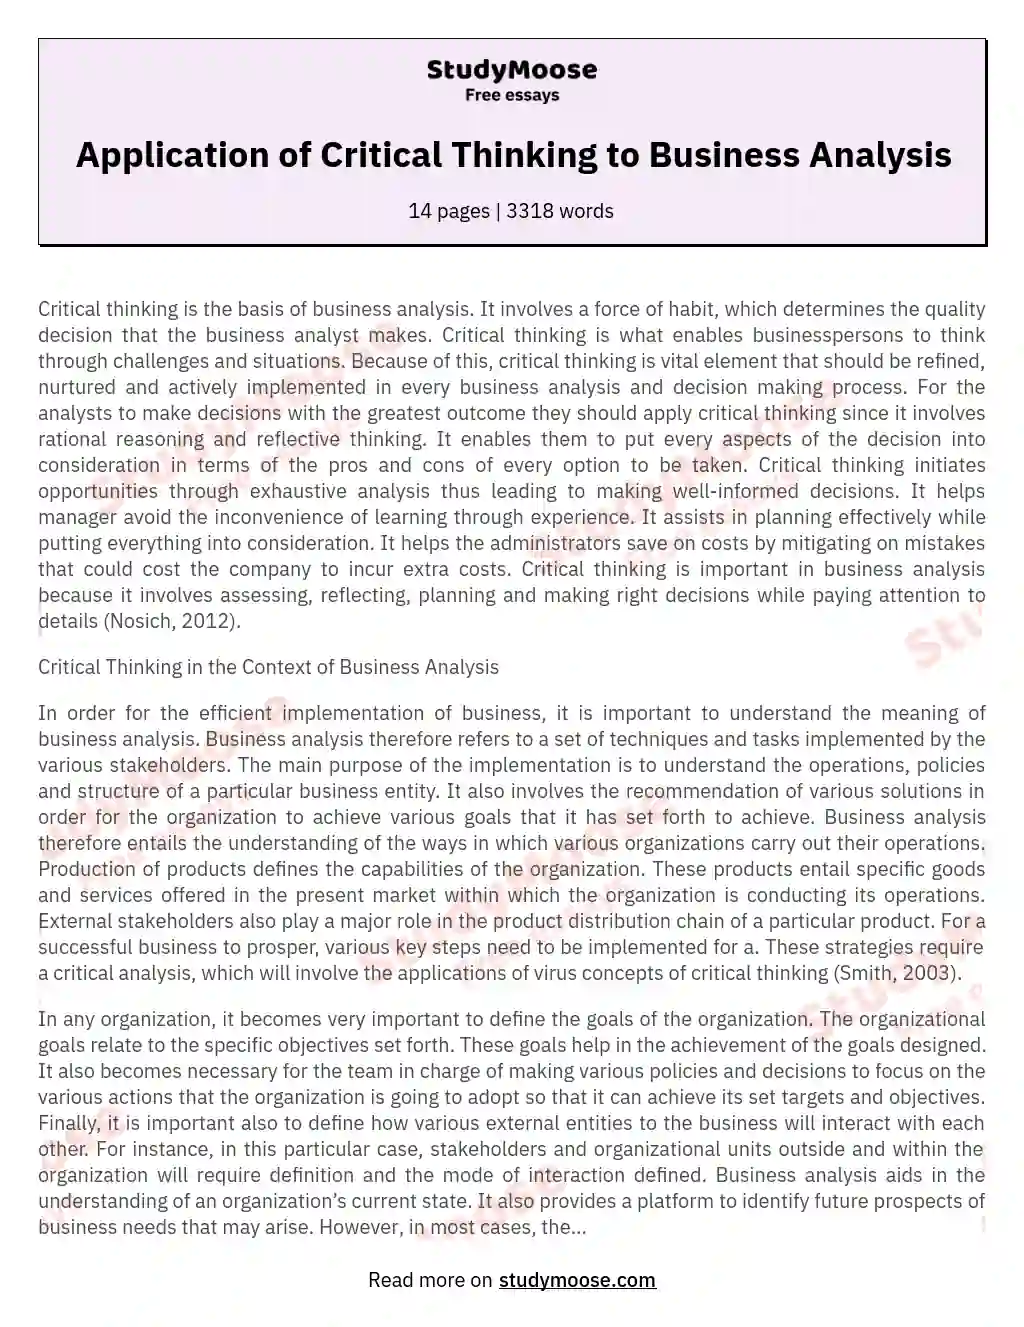 Application of Critical Thinking to Business Analysis